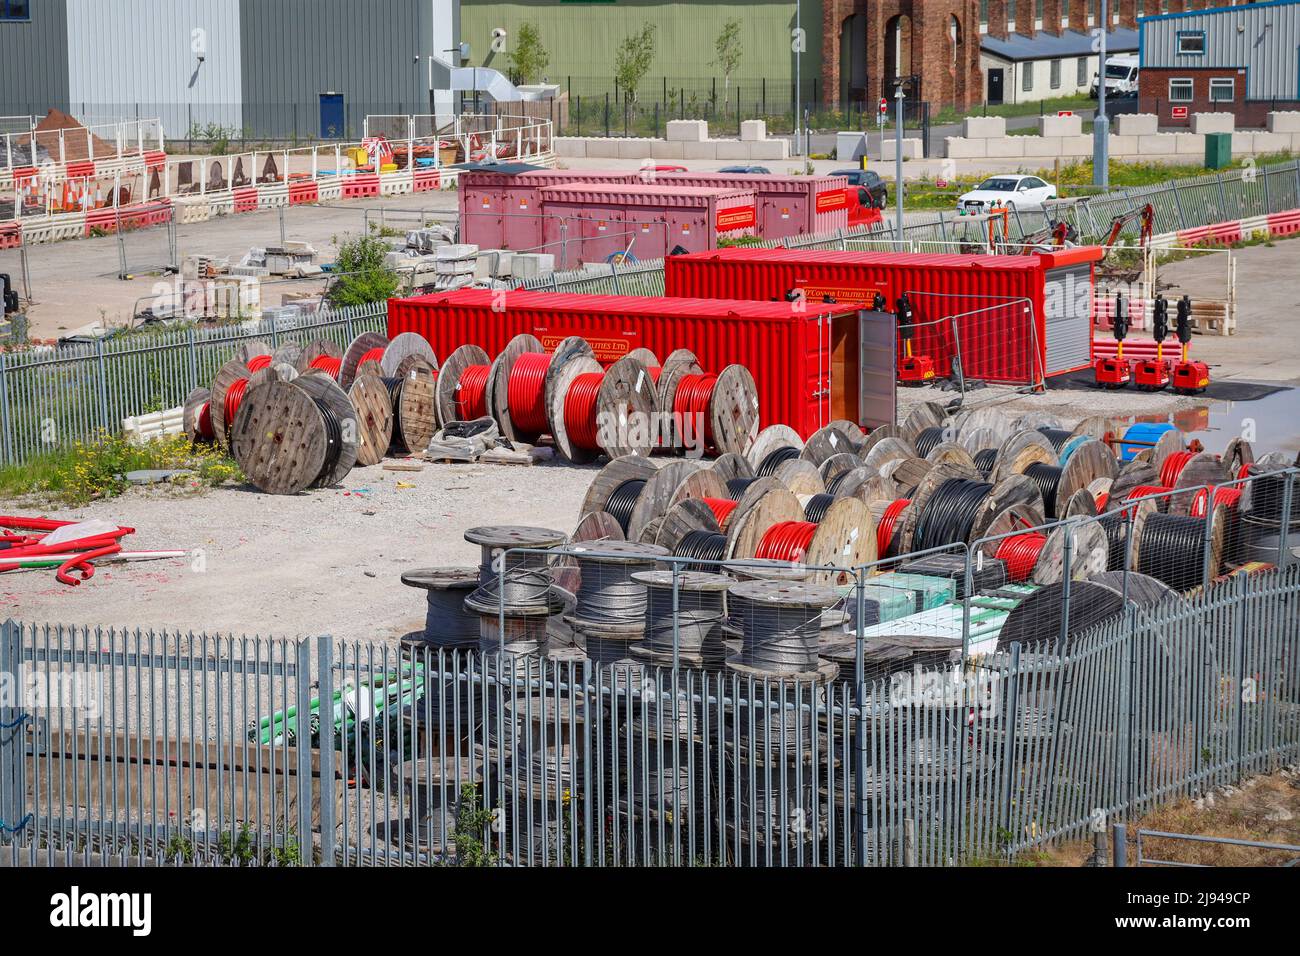 Industrial yard / estate with containers, wire cable reels / drums in red Stock Photo